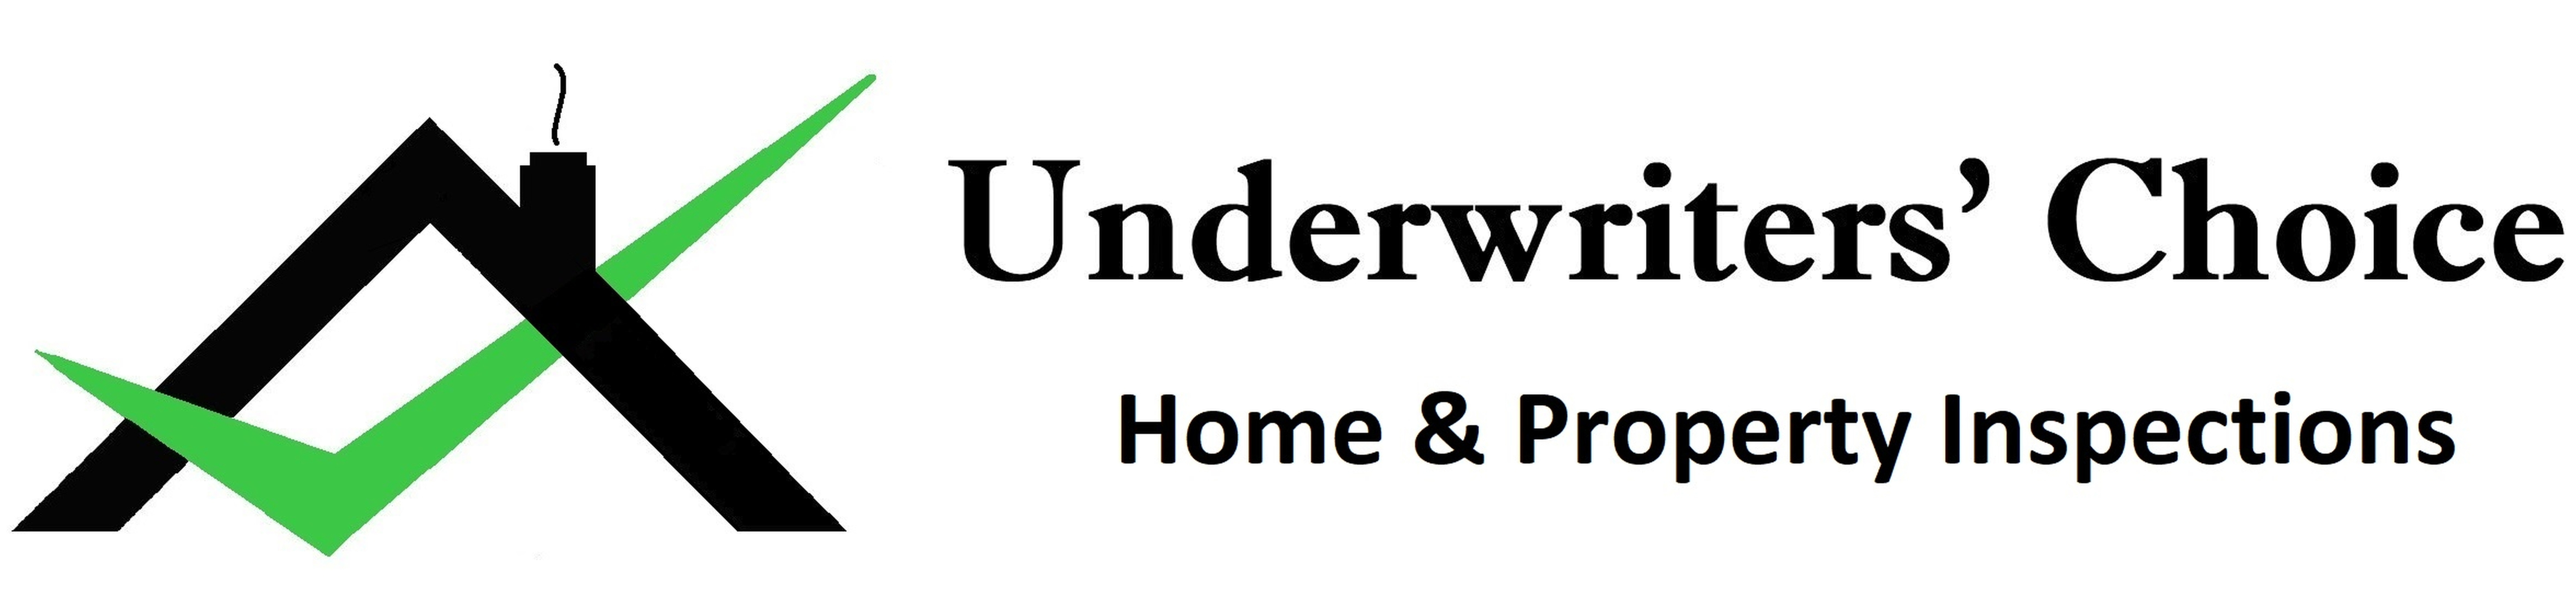 Underwriters' Choice Home Inspection